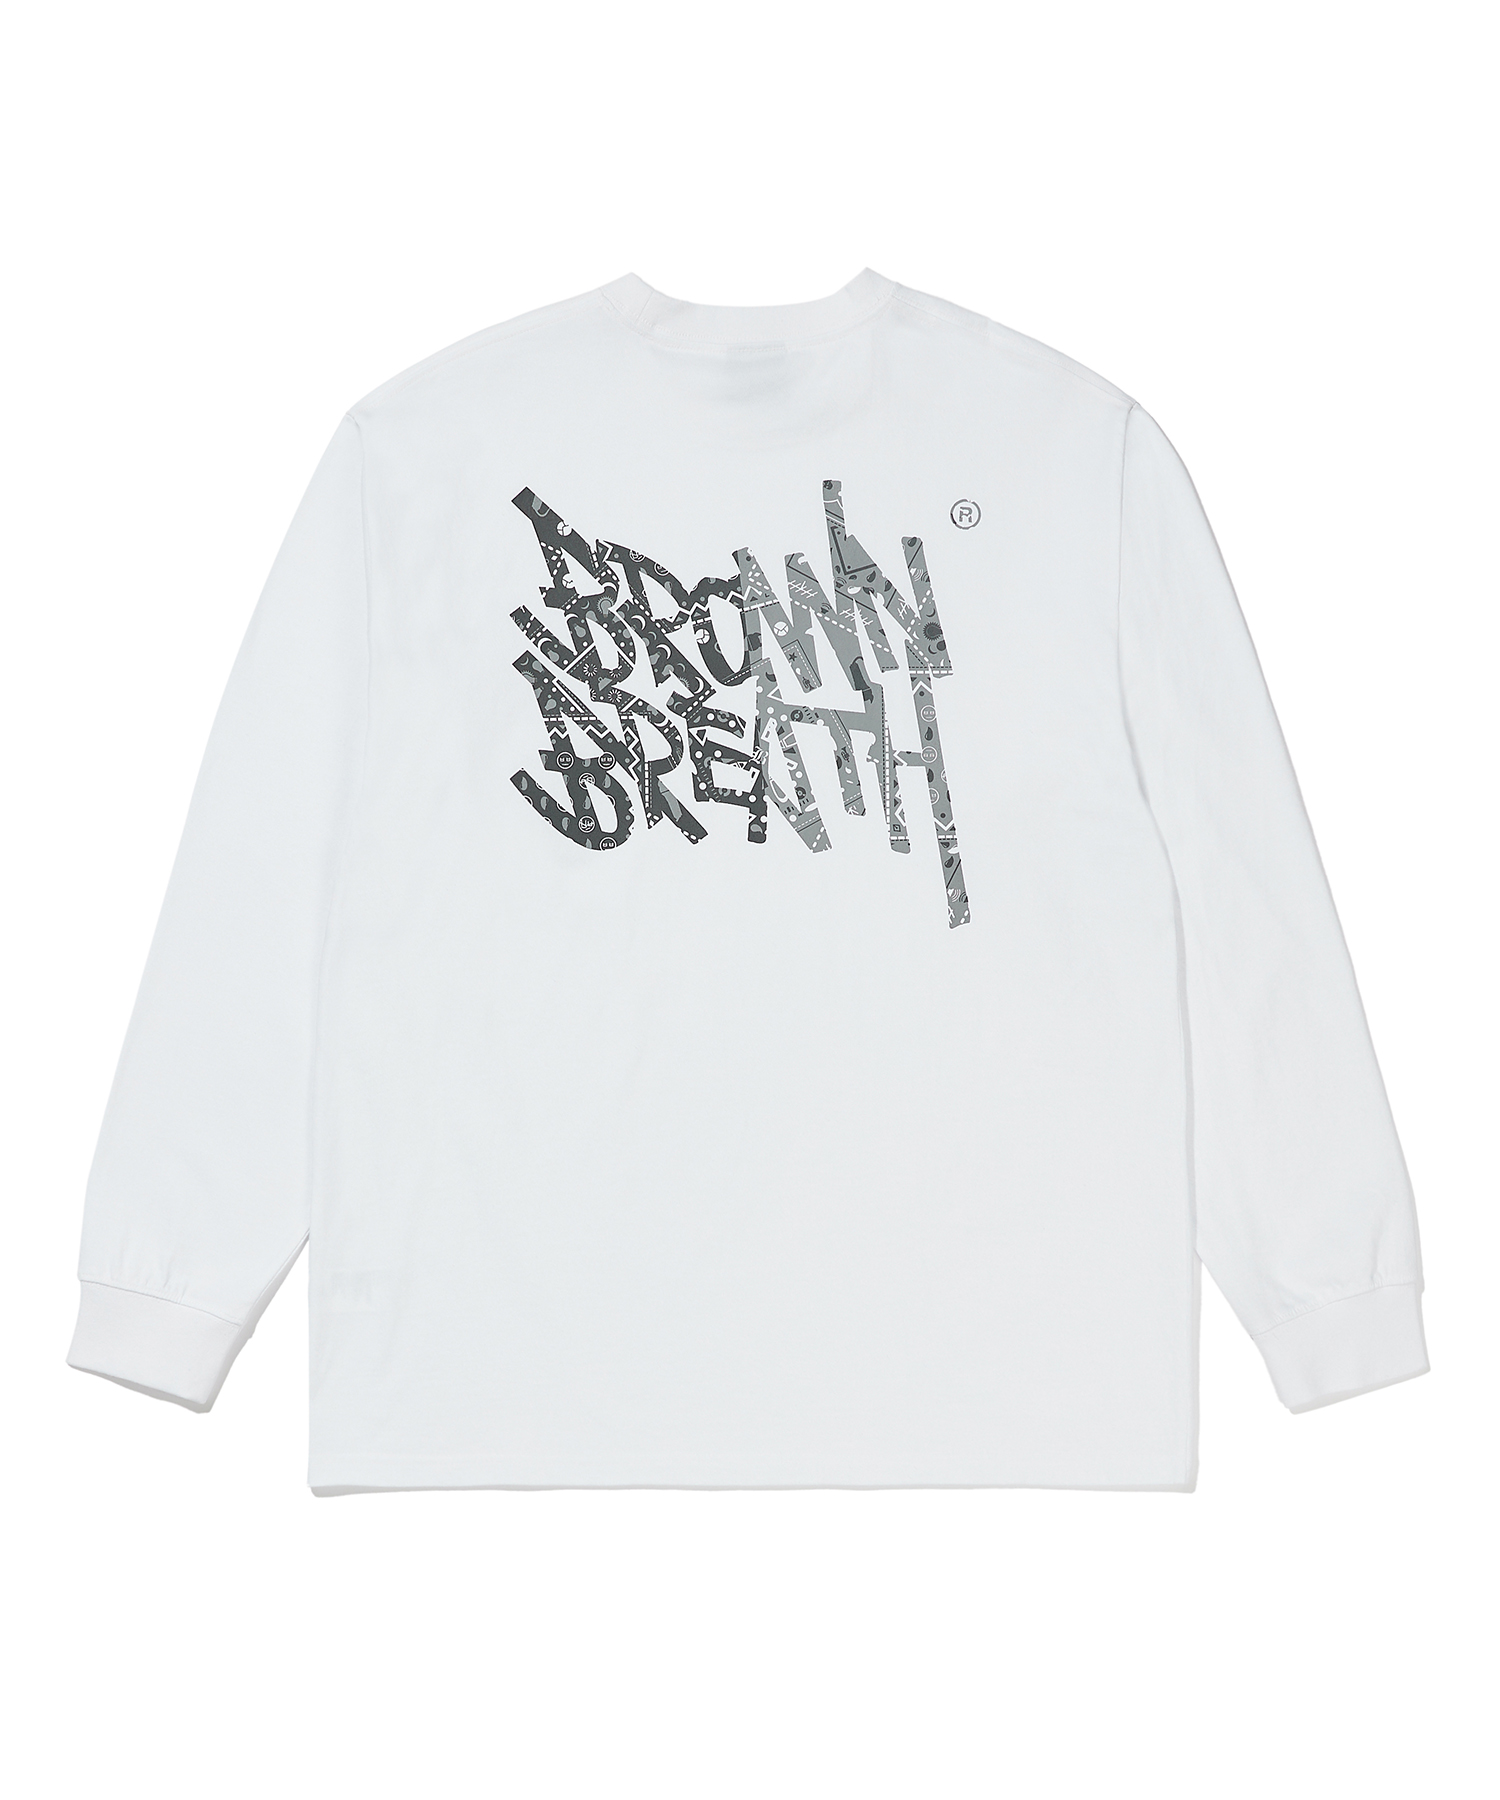 [ONLINE EXCLUSIVE] PAISLEY TAG LONGSLEEVE - WHITE brownbreath